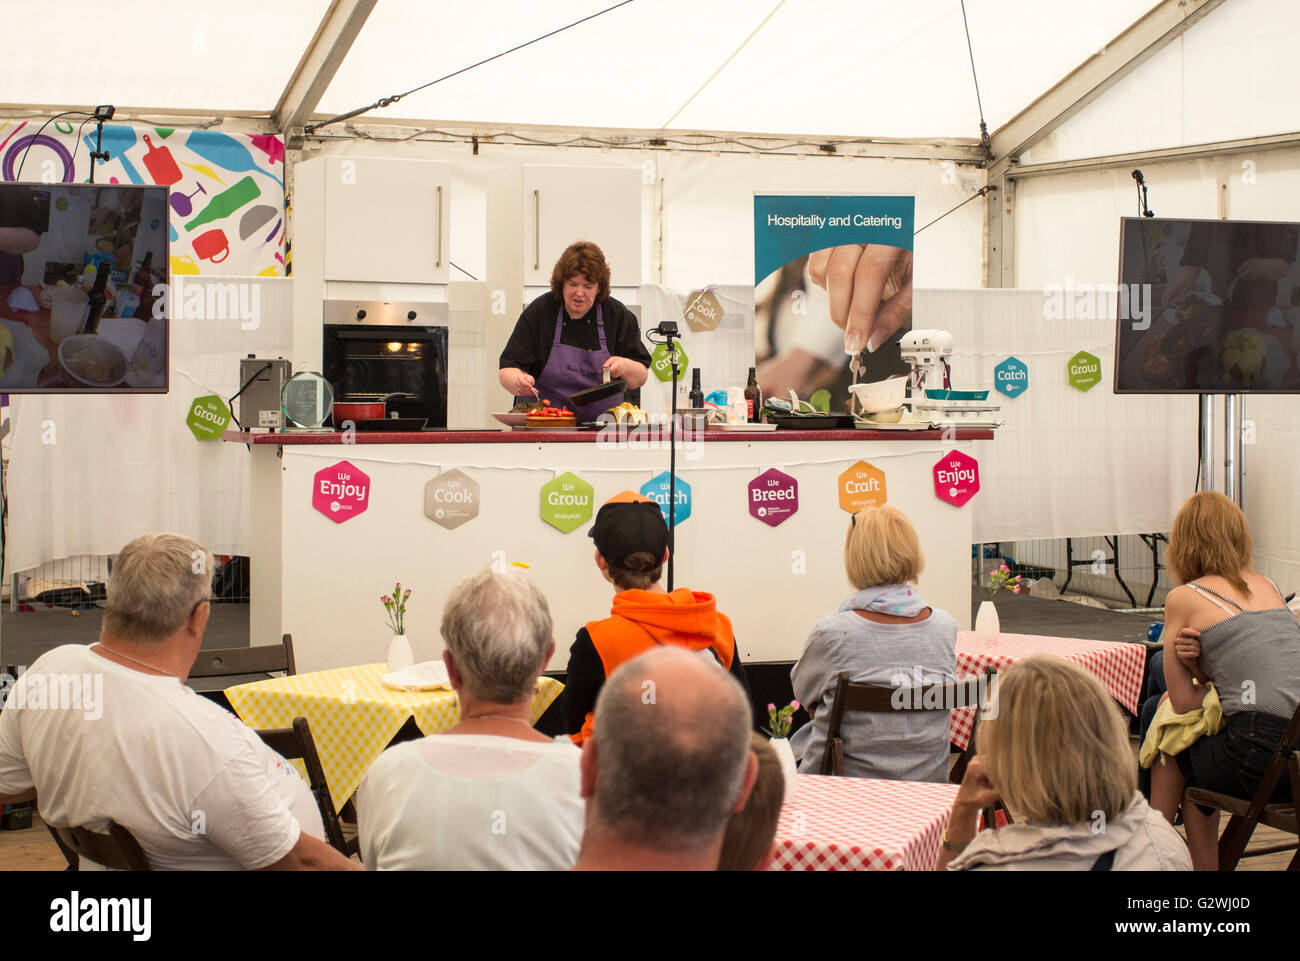 Bangor, Northern Ireland, UK, 4th June 2016. Paula McIntyre gives a cooking demonstration during The Sea Bangor Festival. The festival launches with cookery demonstrations, dockside emporium, entertainers, and sailings on the Tall Ship Mercedes. Credit:  J Orr/Alamy Live News Stock Photo